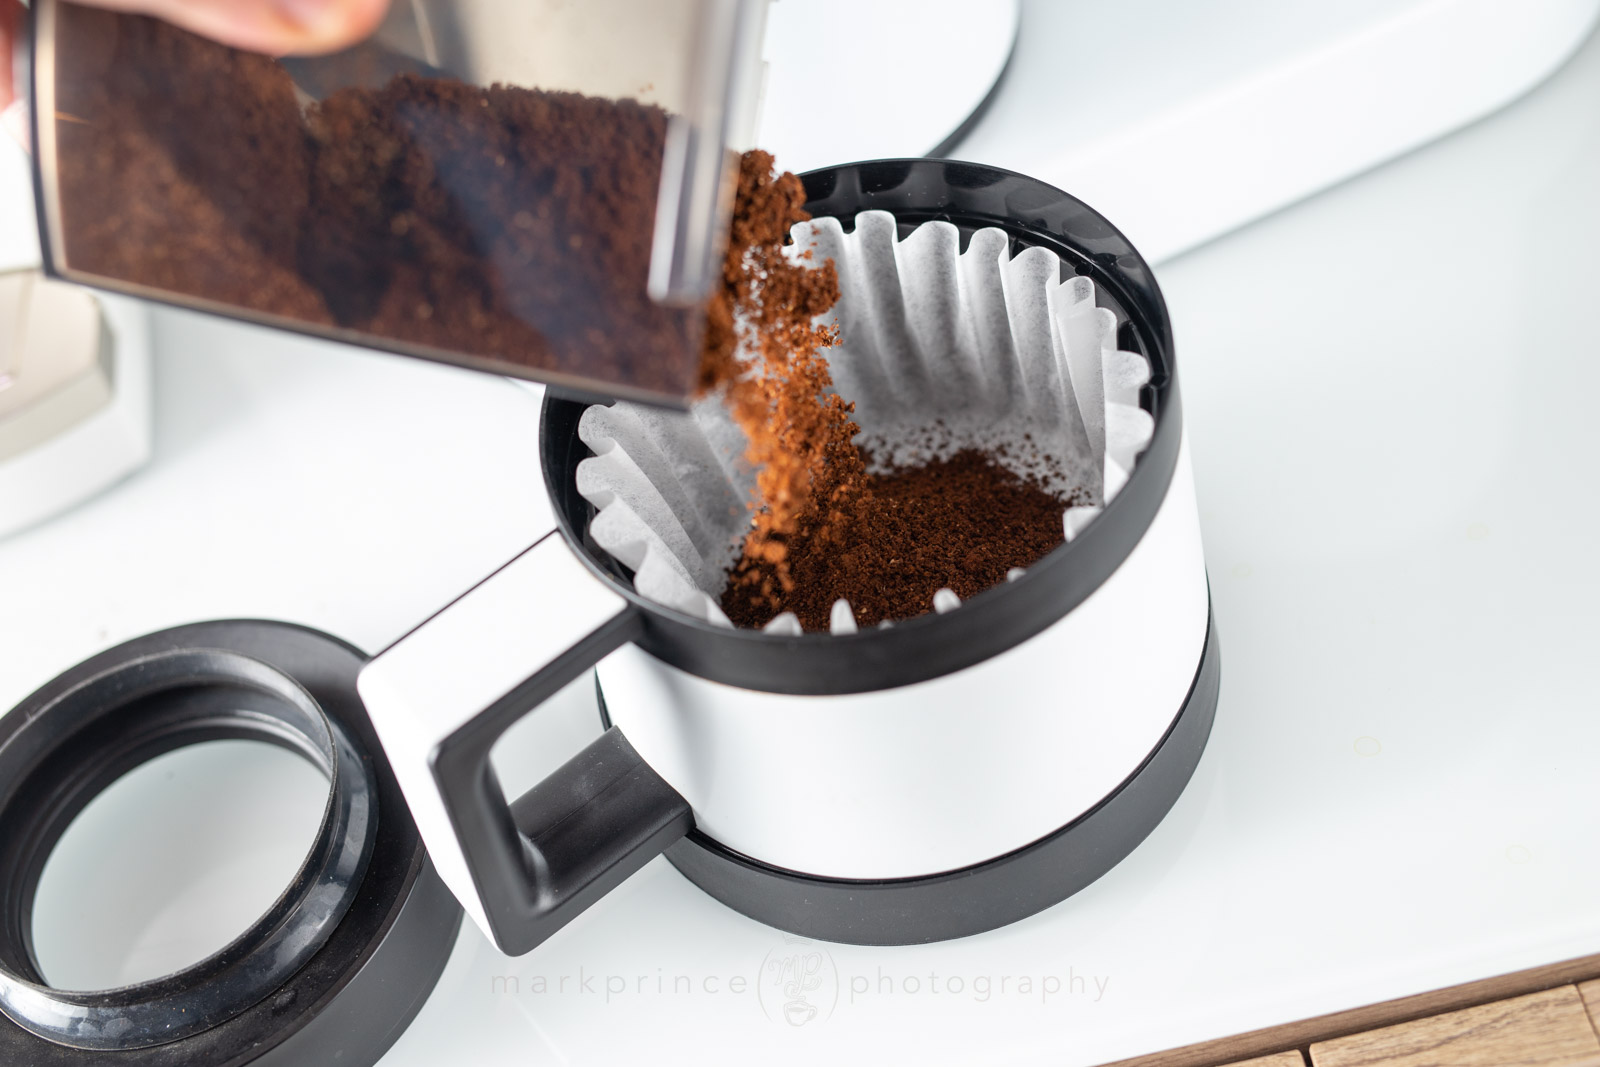 Ratio Ratio Six Automatic Pour Over Coffee Maker